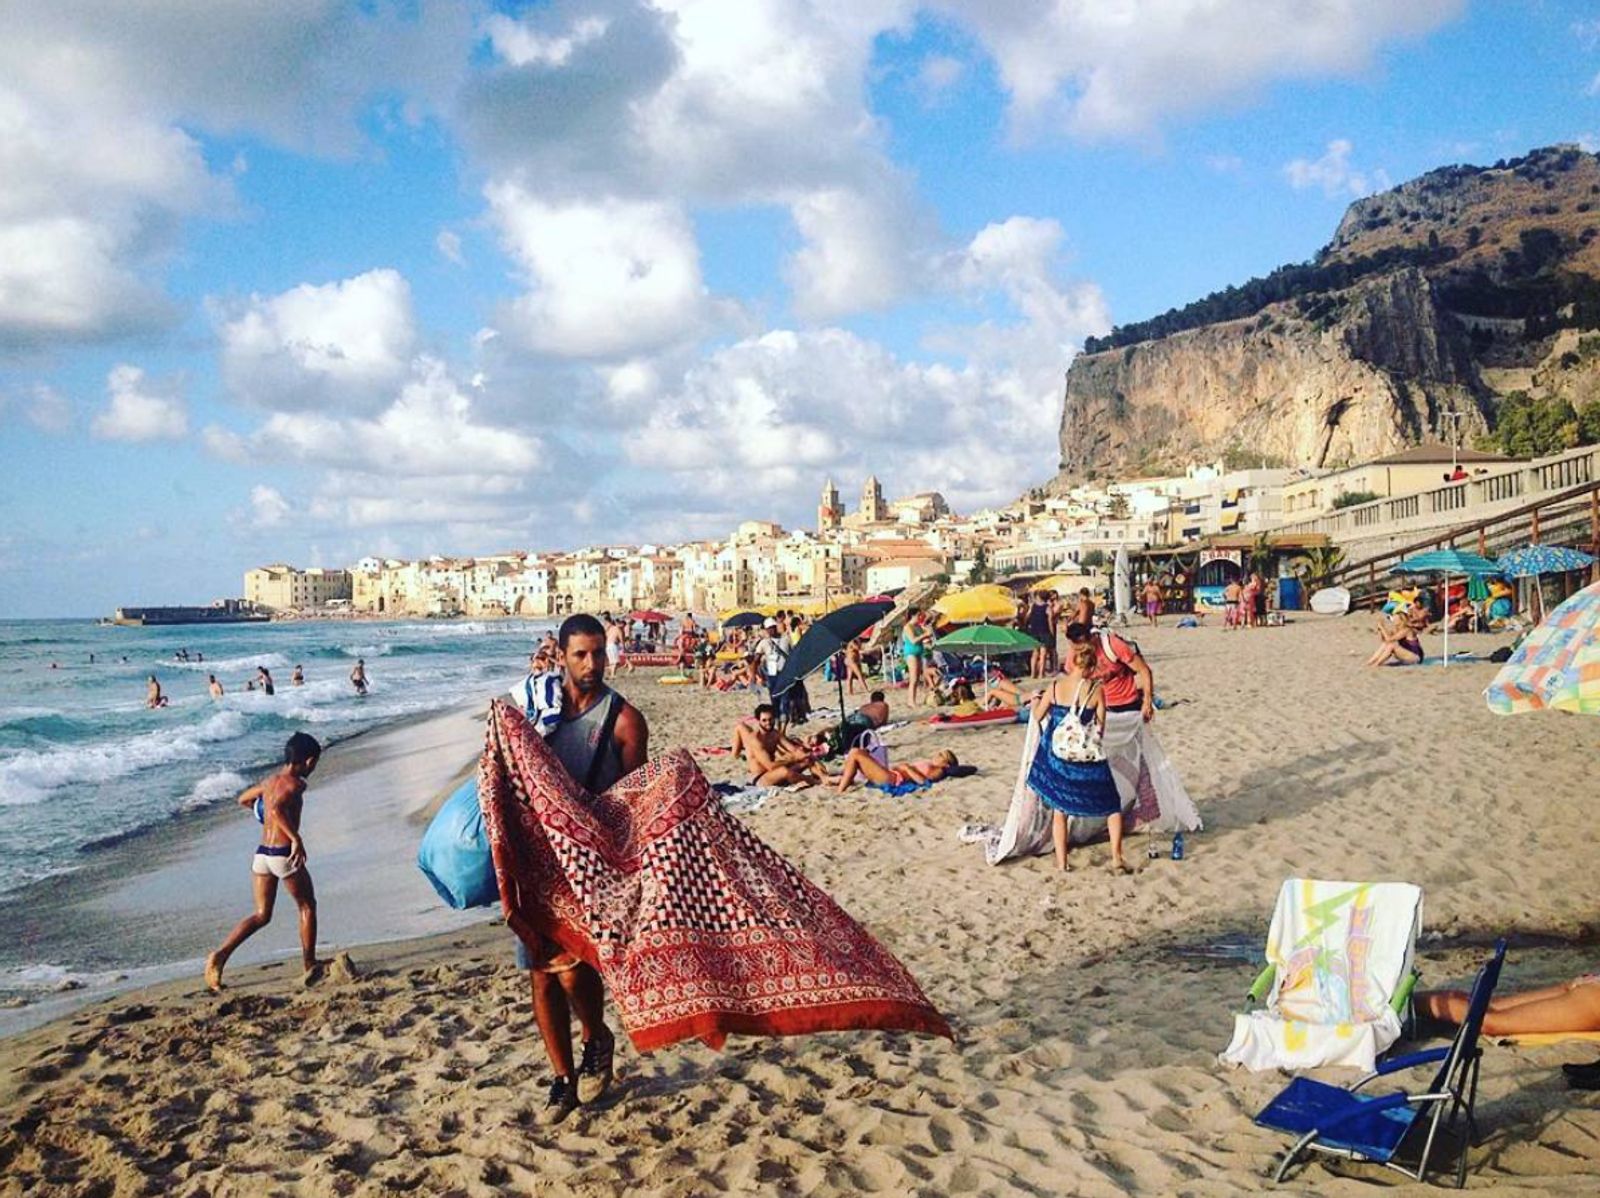 A picture of Sicily from Simone Sapienza's Instagram account